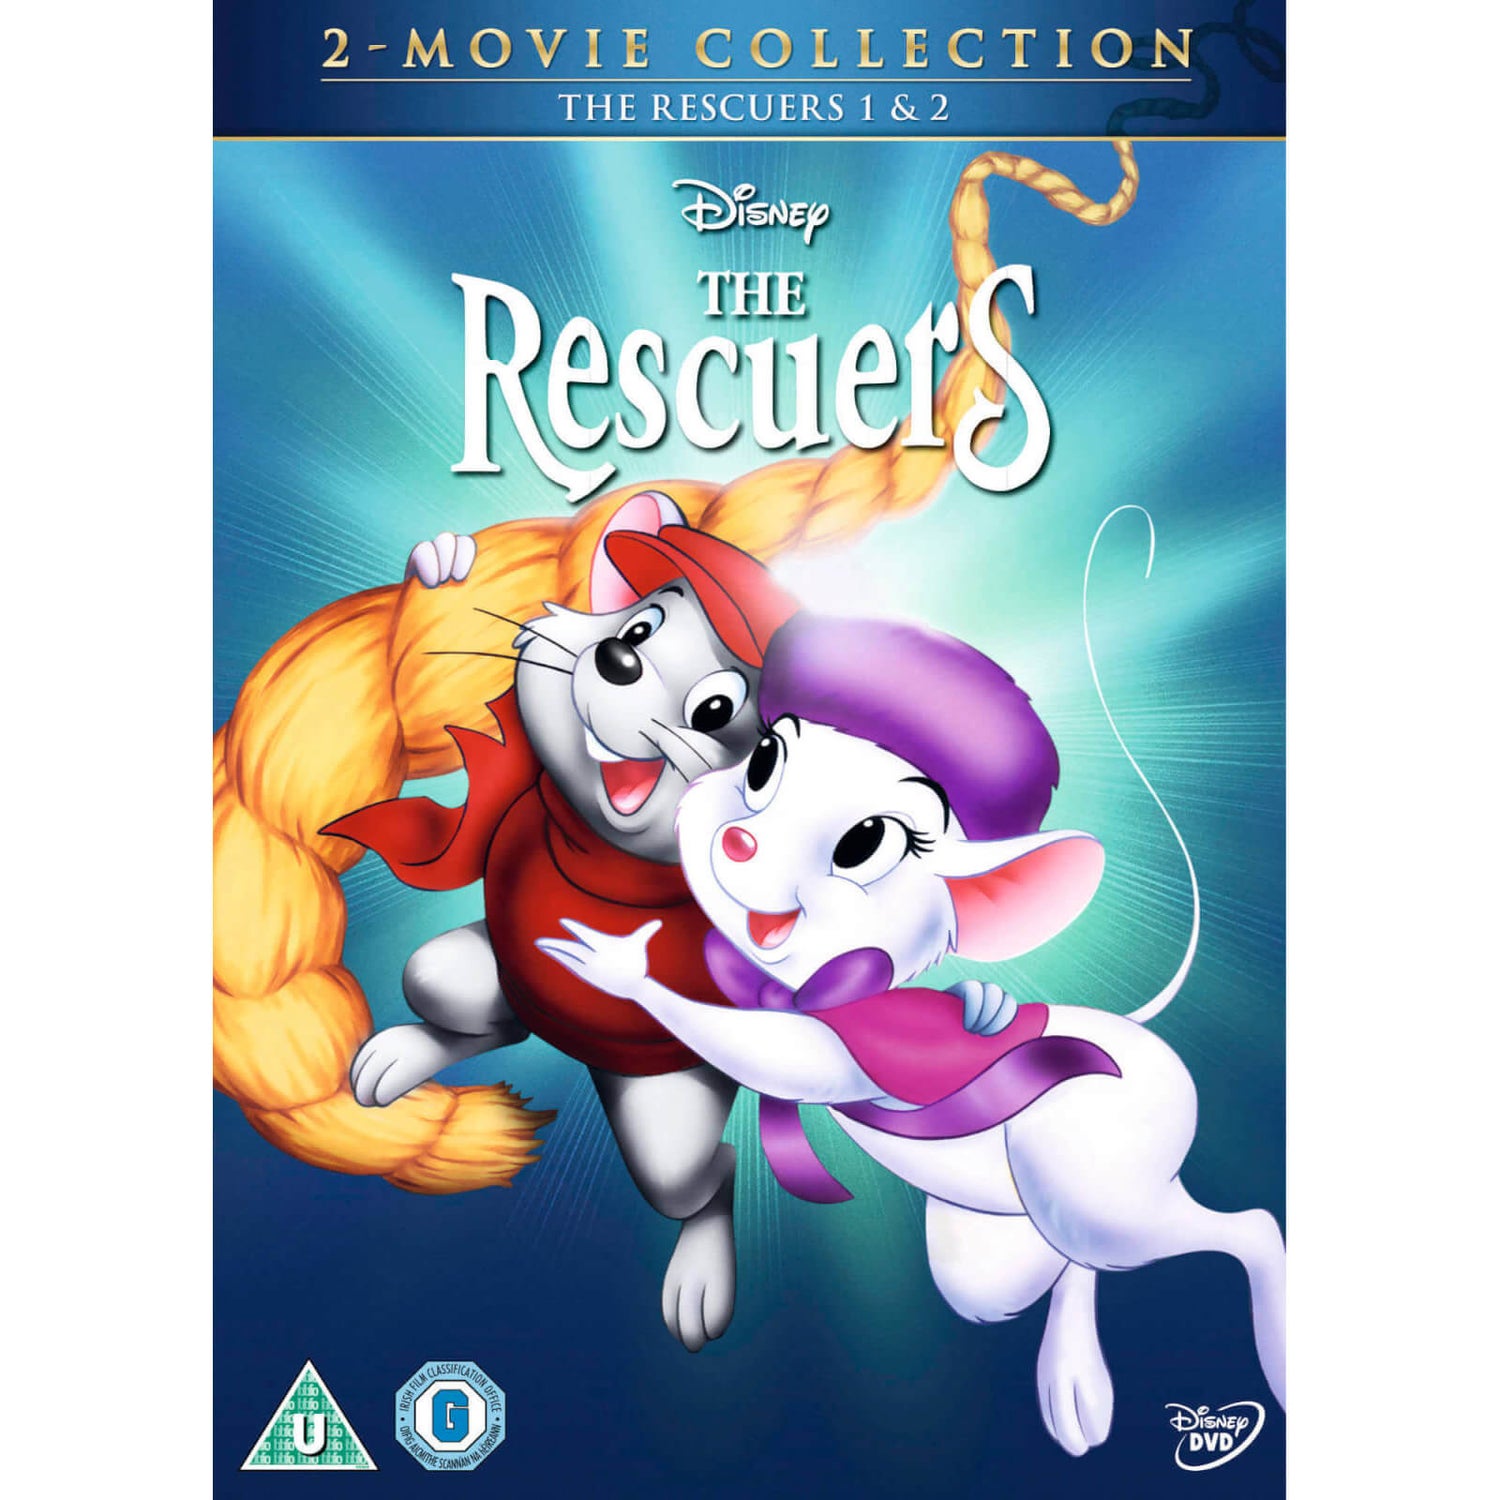 Rescuers & Rescuers Down Under DVD Doublepack